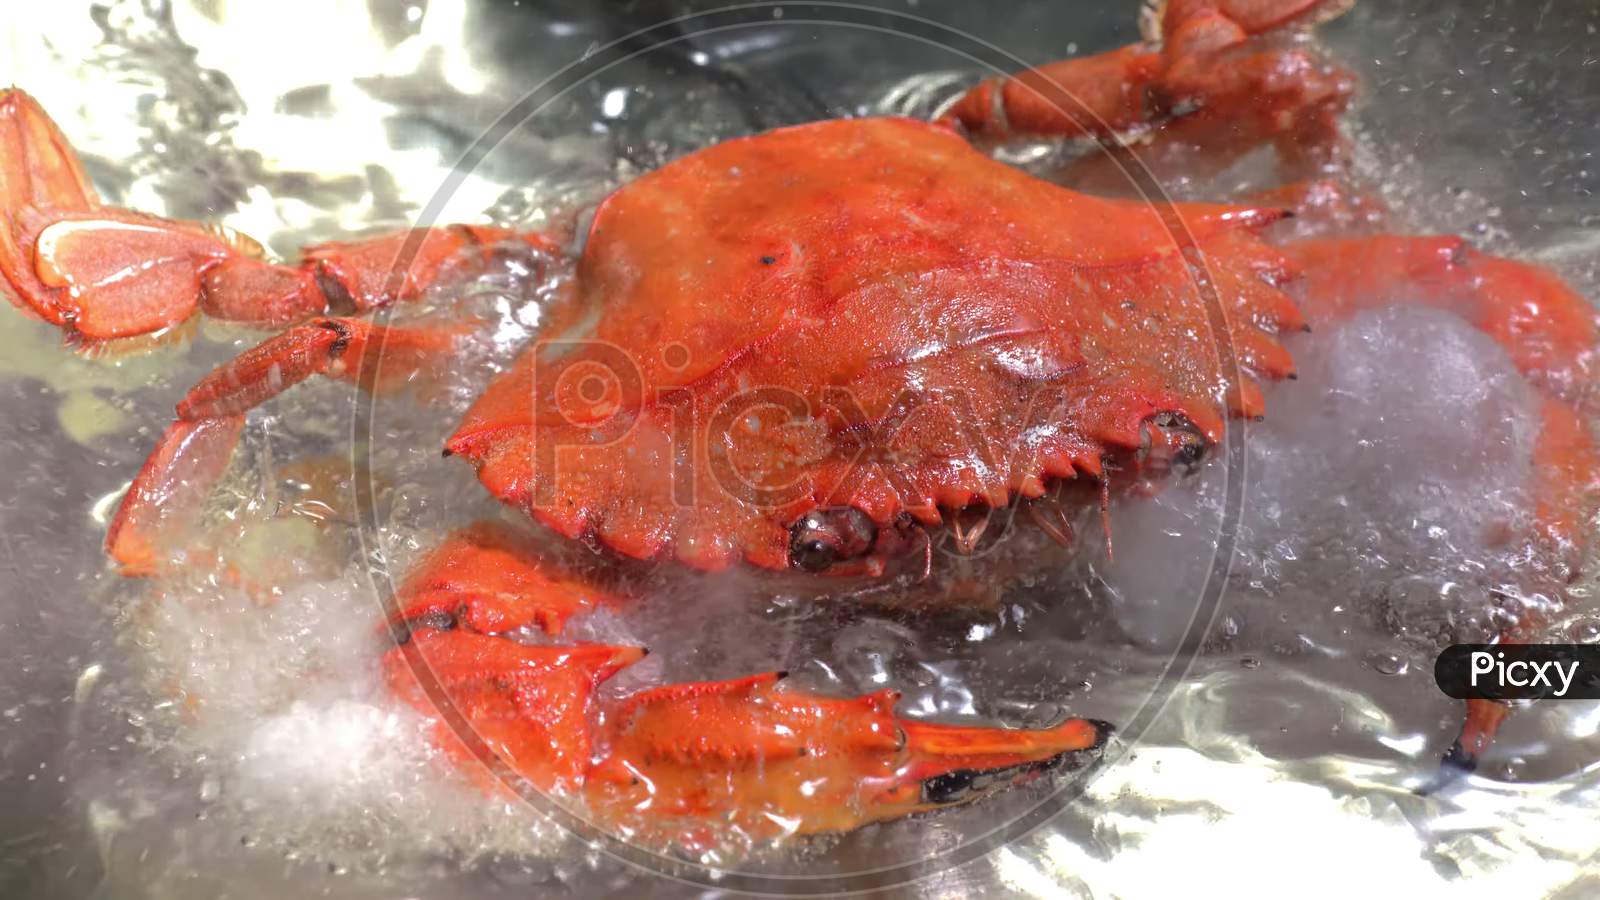 Boiling crab in hot water. Selective focus and shallow depth of field.